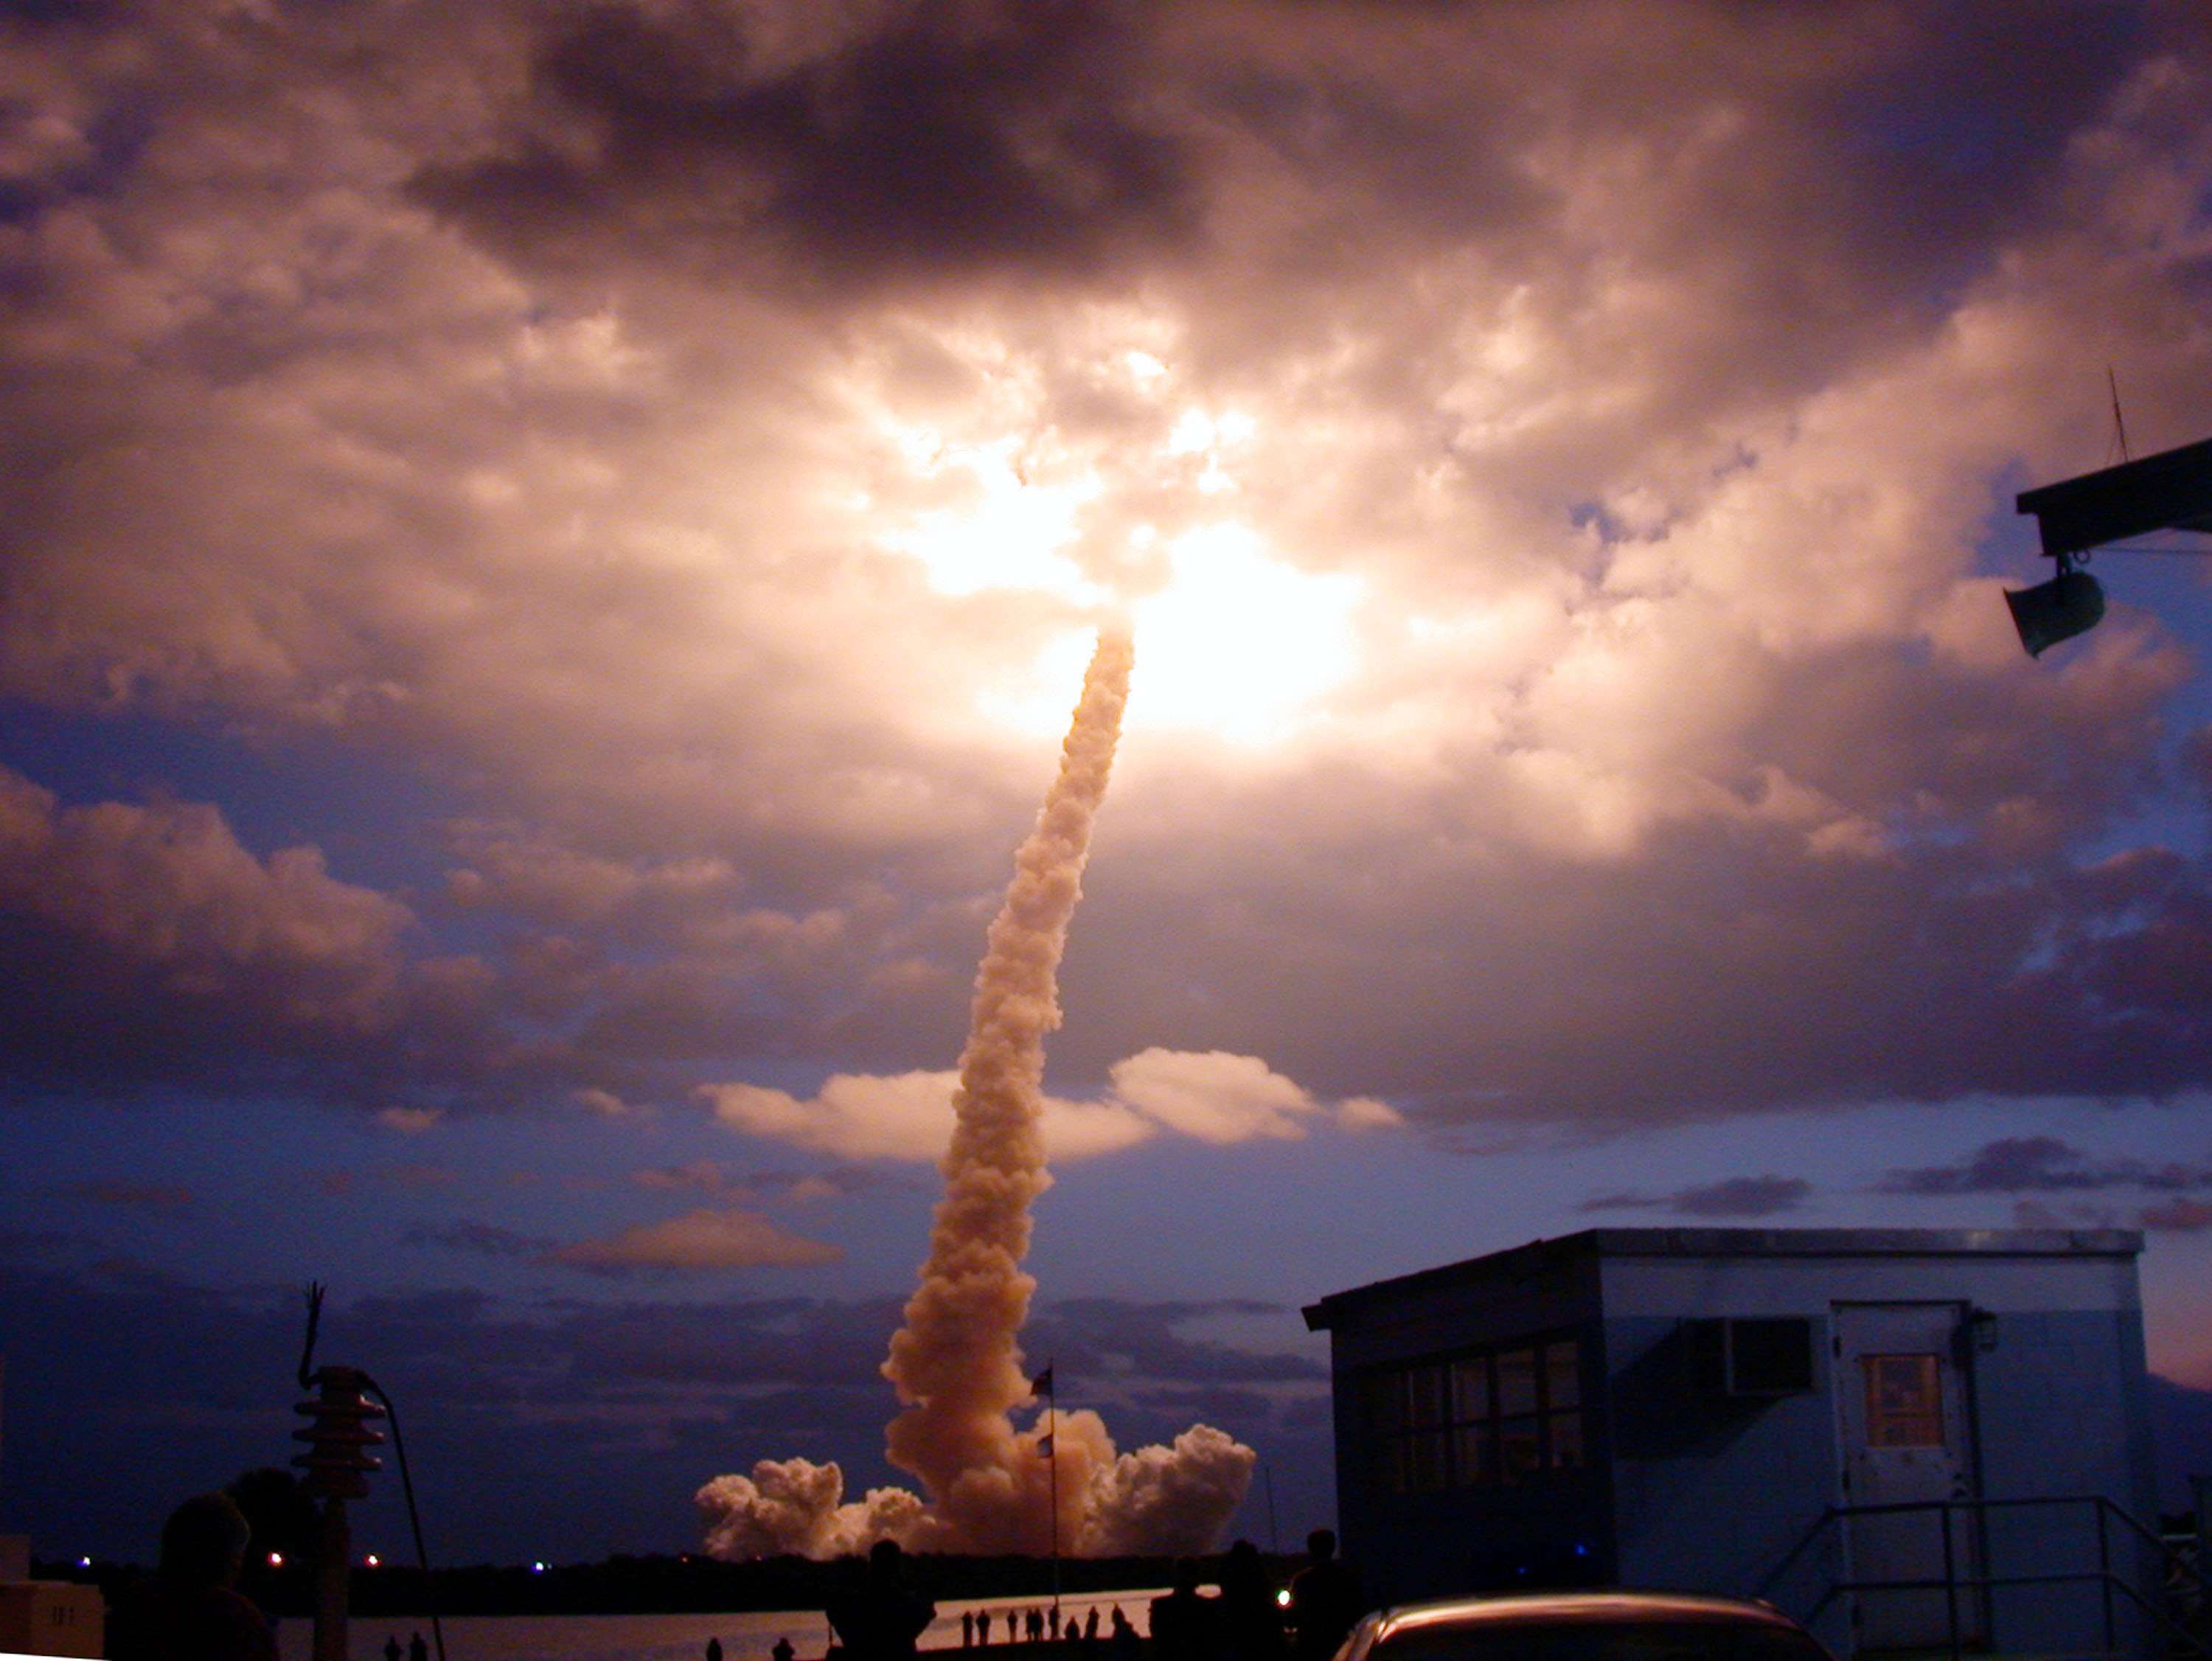 The space Shuttle launches into a cloud,illuminating the cloud from the inside out, with a trail of smoke behind it.